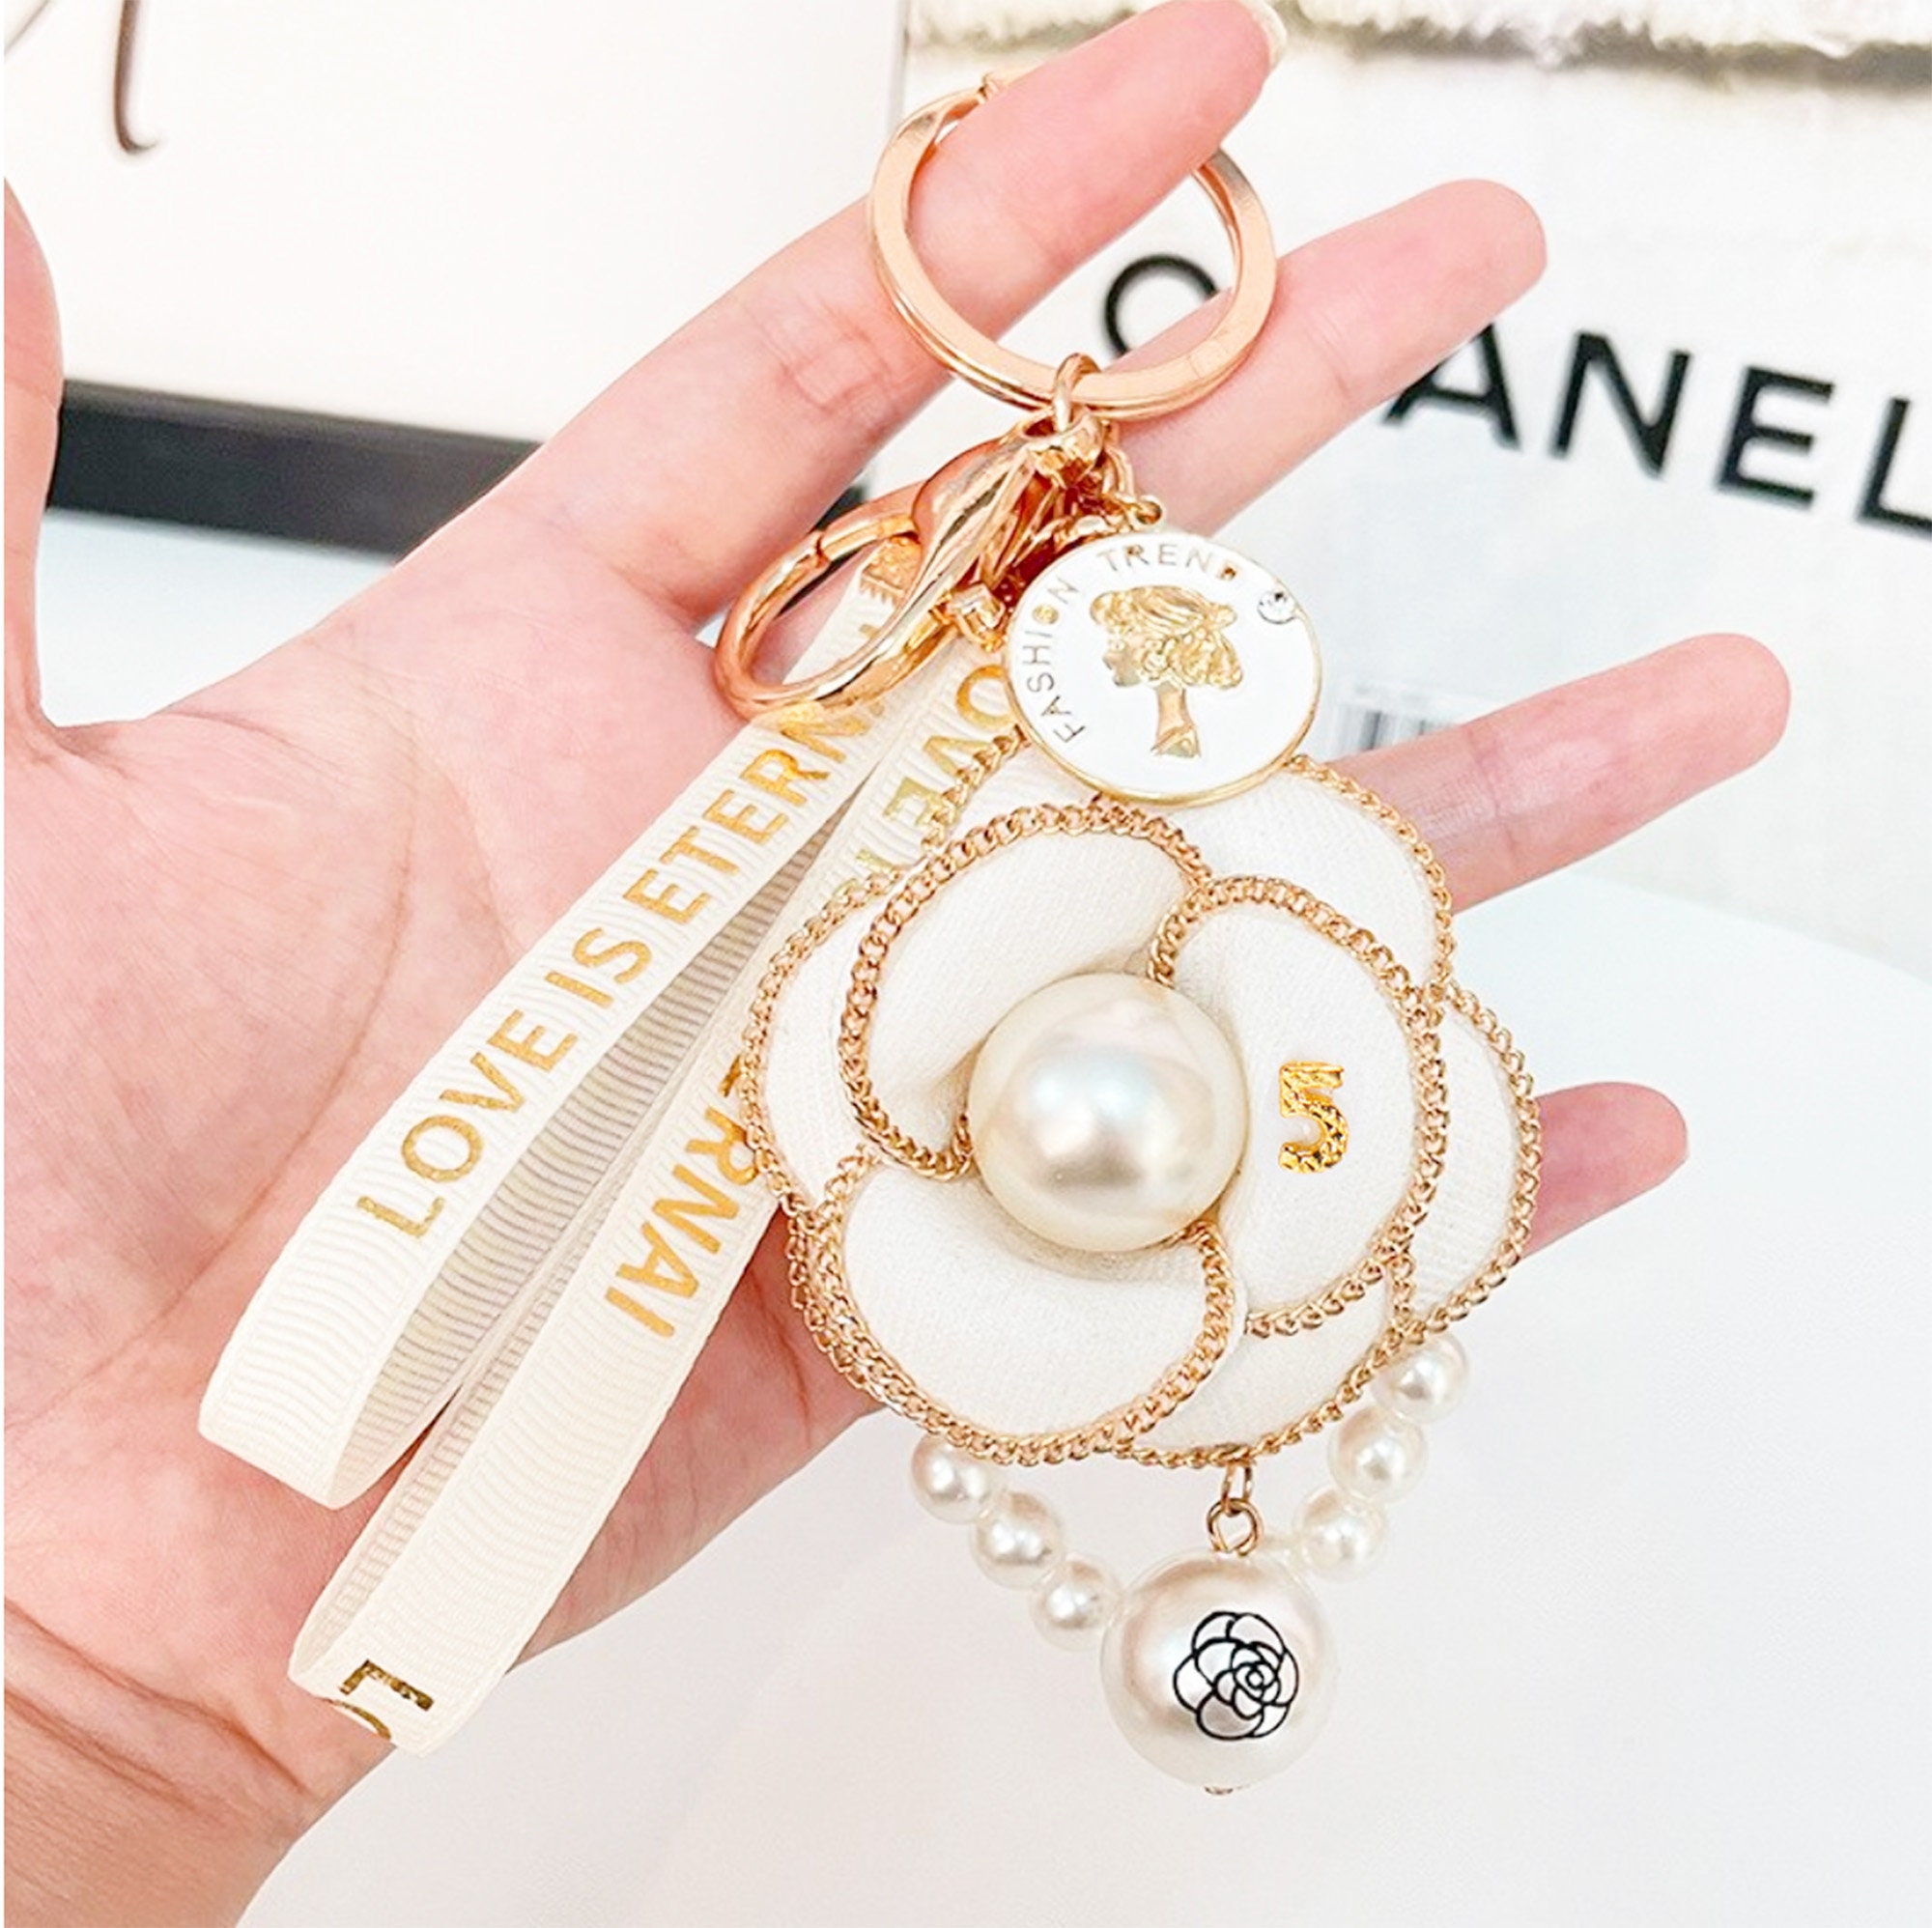 Buy Chanel Bag Charm Online In India -  India